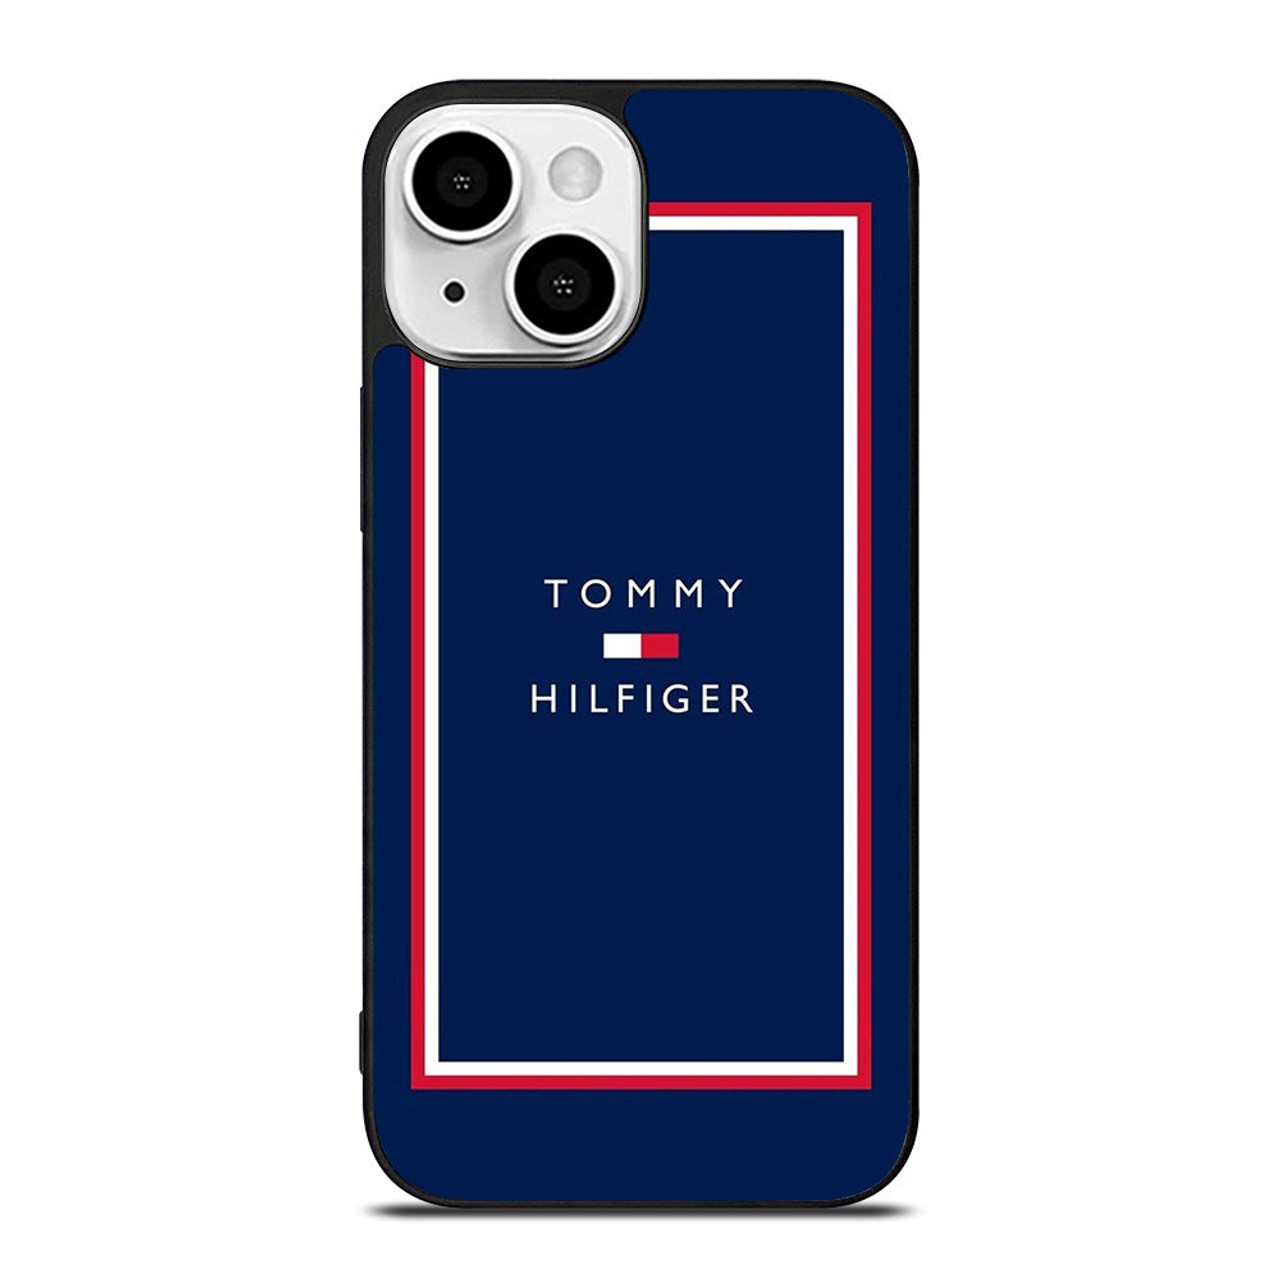 TOMMY HILFIGER LOGO iPhone 13 Mini Case Cover